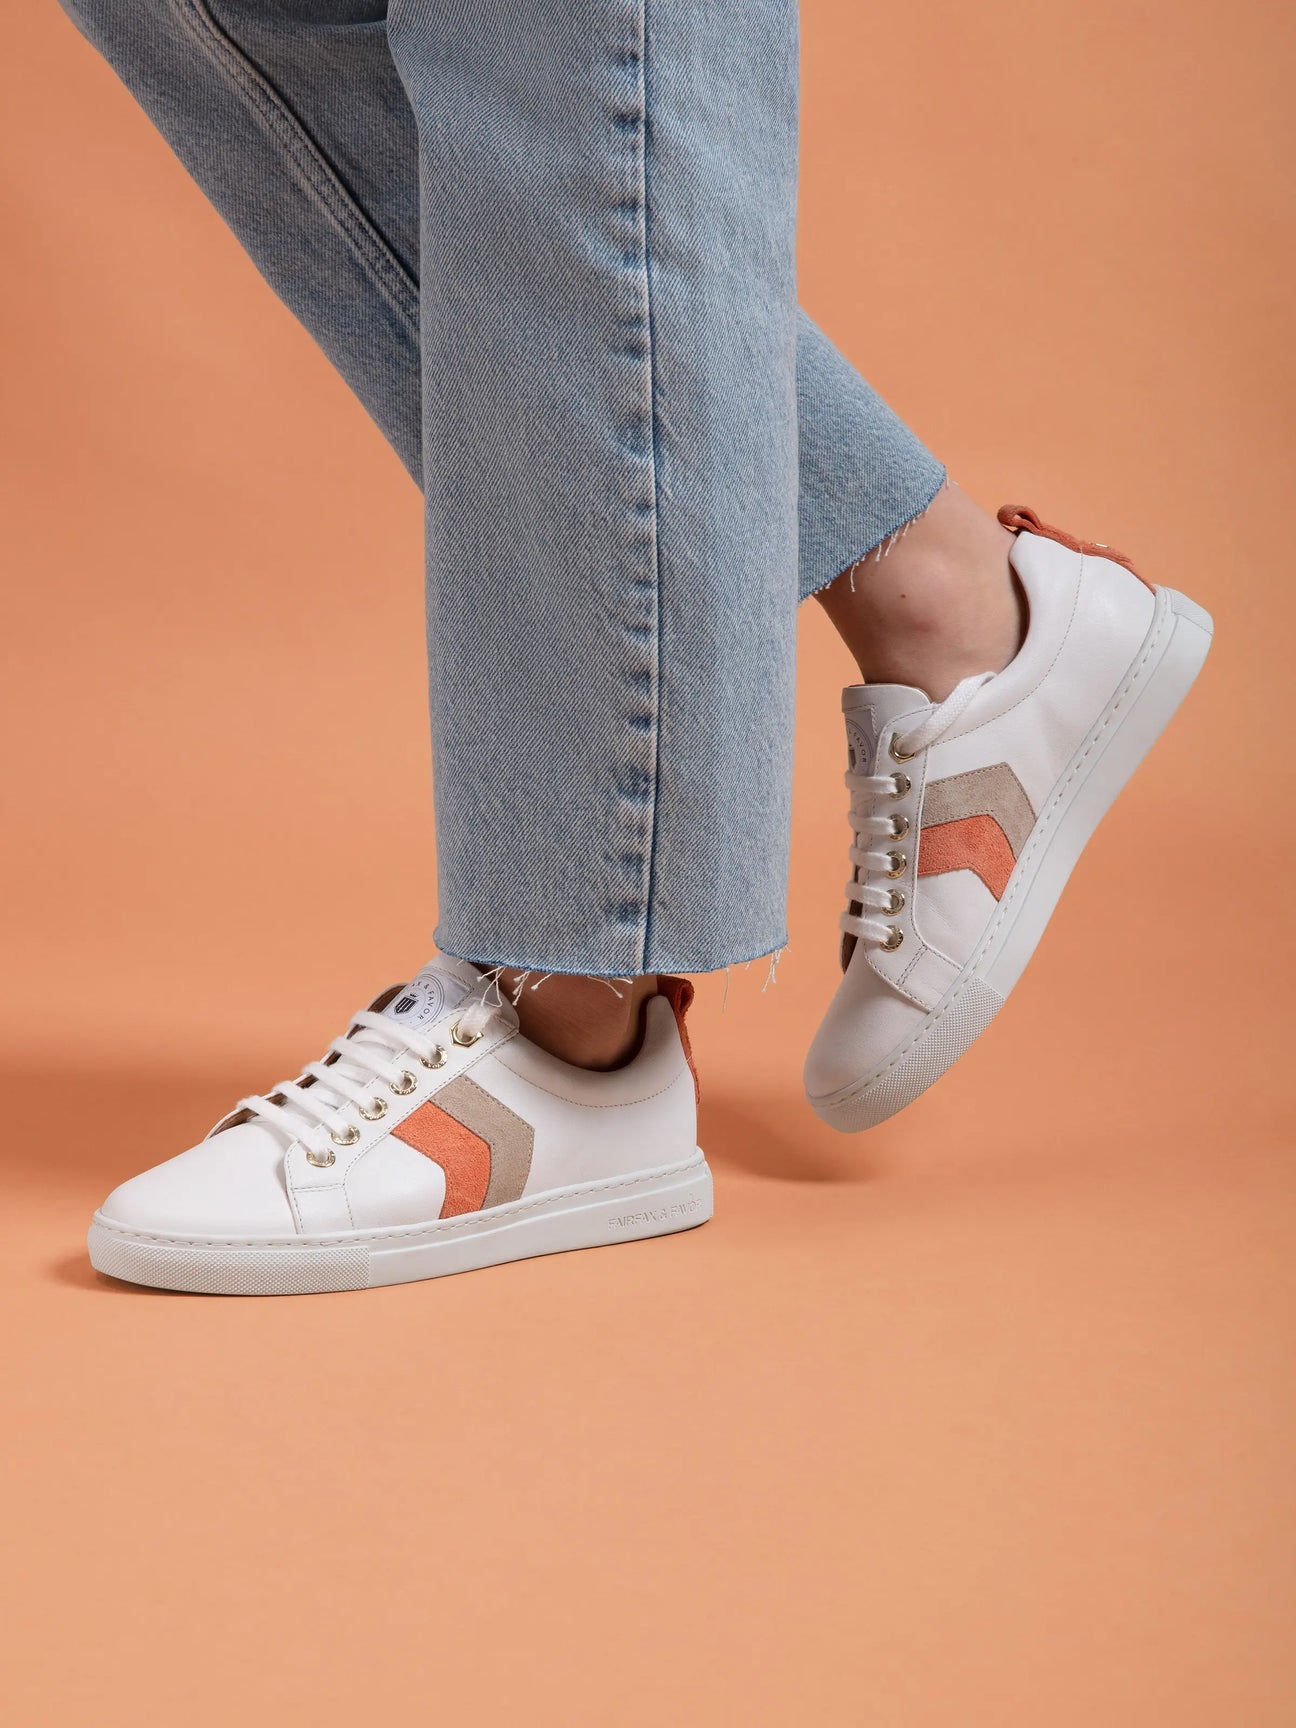 Alexandra Women's Trainer - White Leather with Melon & Stone Suede